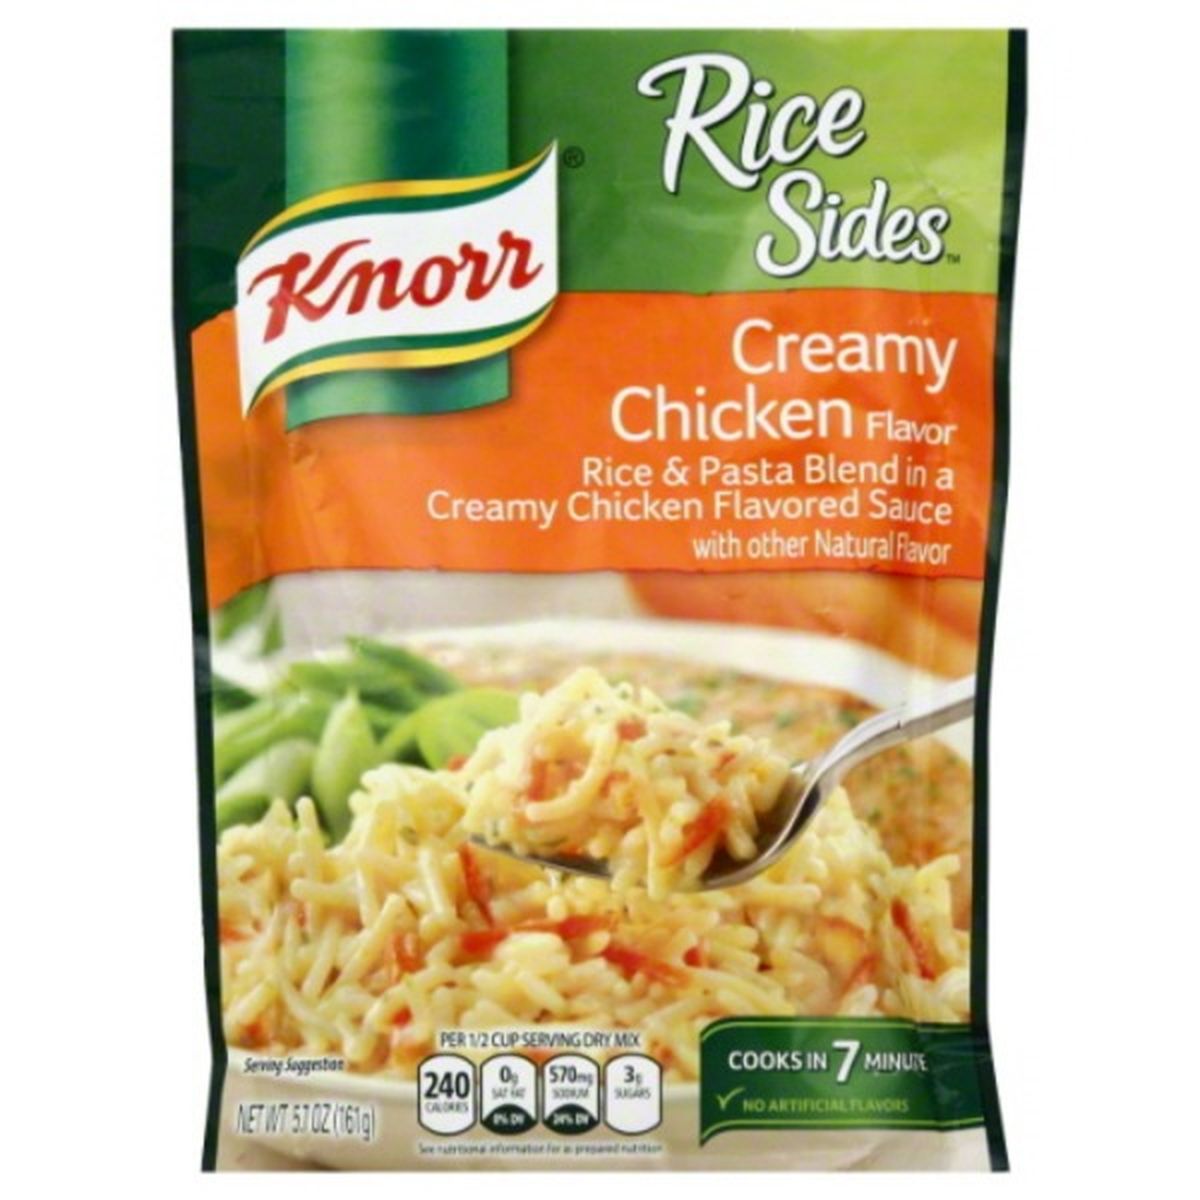 Calories in Knorr Rice Sides Rice & Pasta Blend, Creamy Chicken Flavor